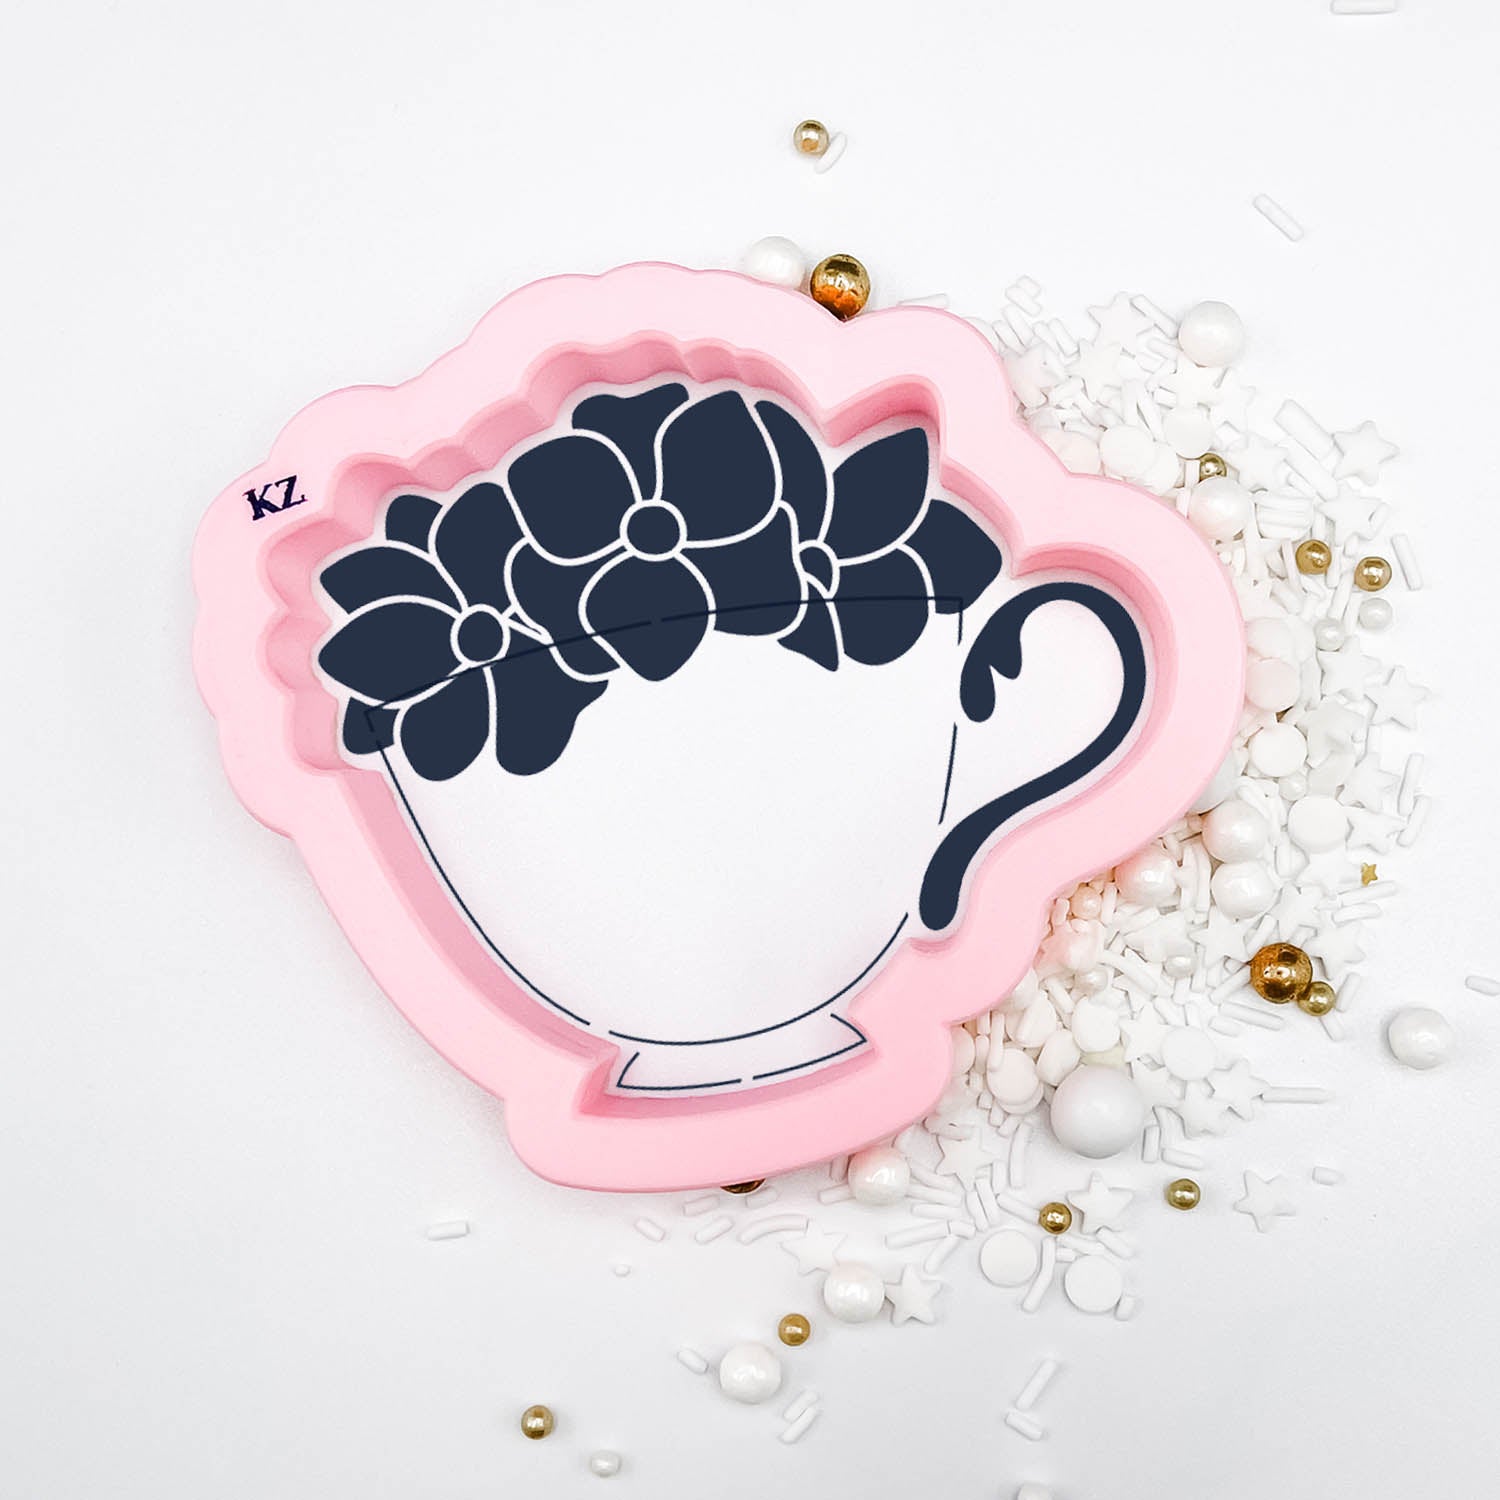 Cookie cutter in the shape of a teacup with flowers in it